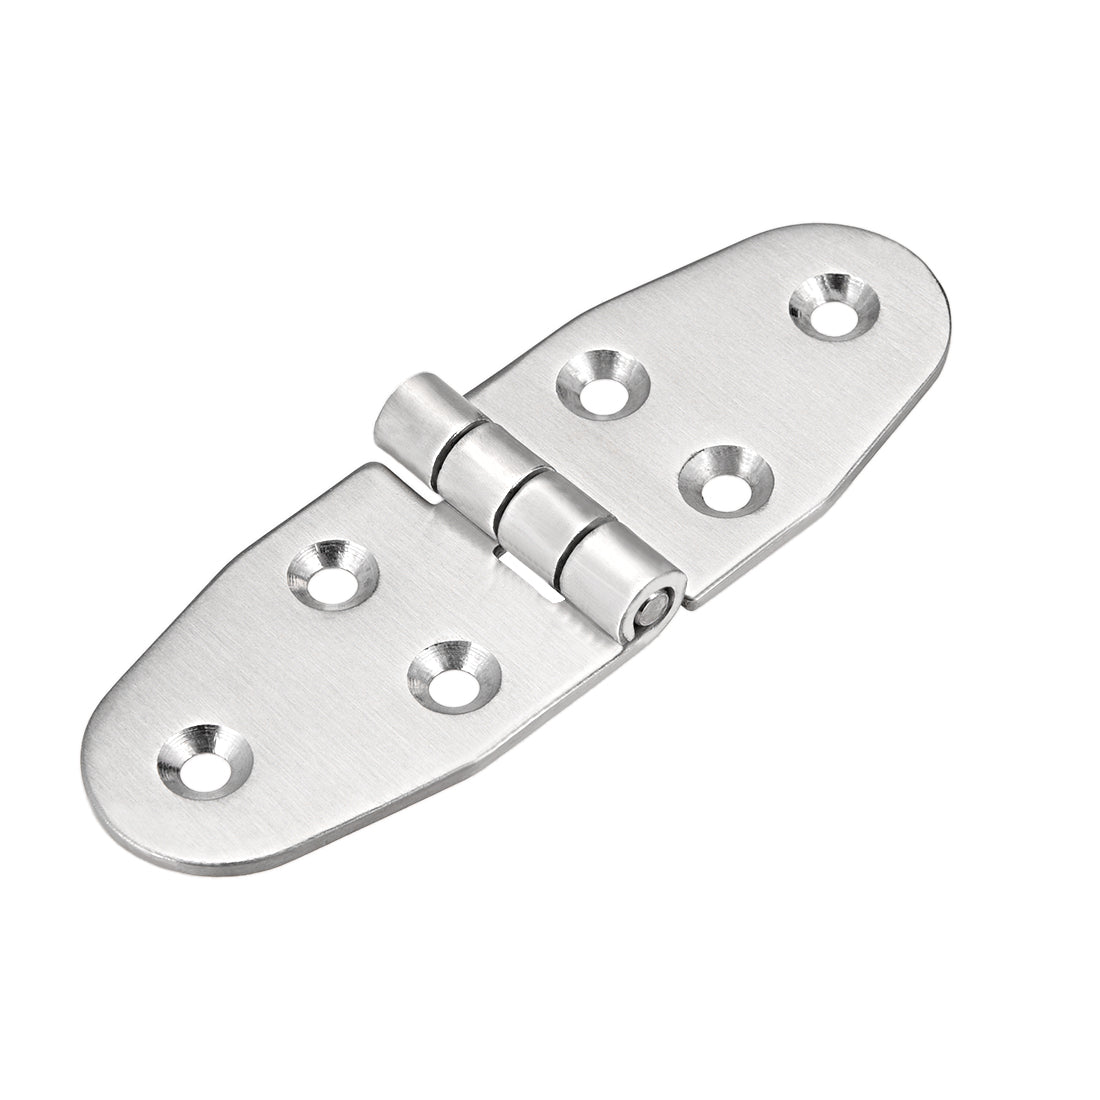 uxcell Uxcell T-Strap Heavy Shed Hinge Gate Door Hinges 304 Stainless Steel, 120mm Overall Length